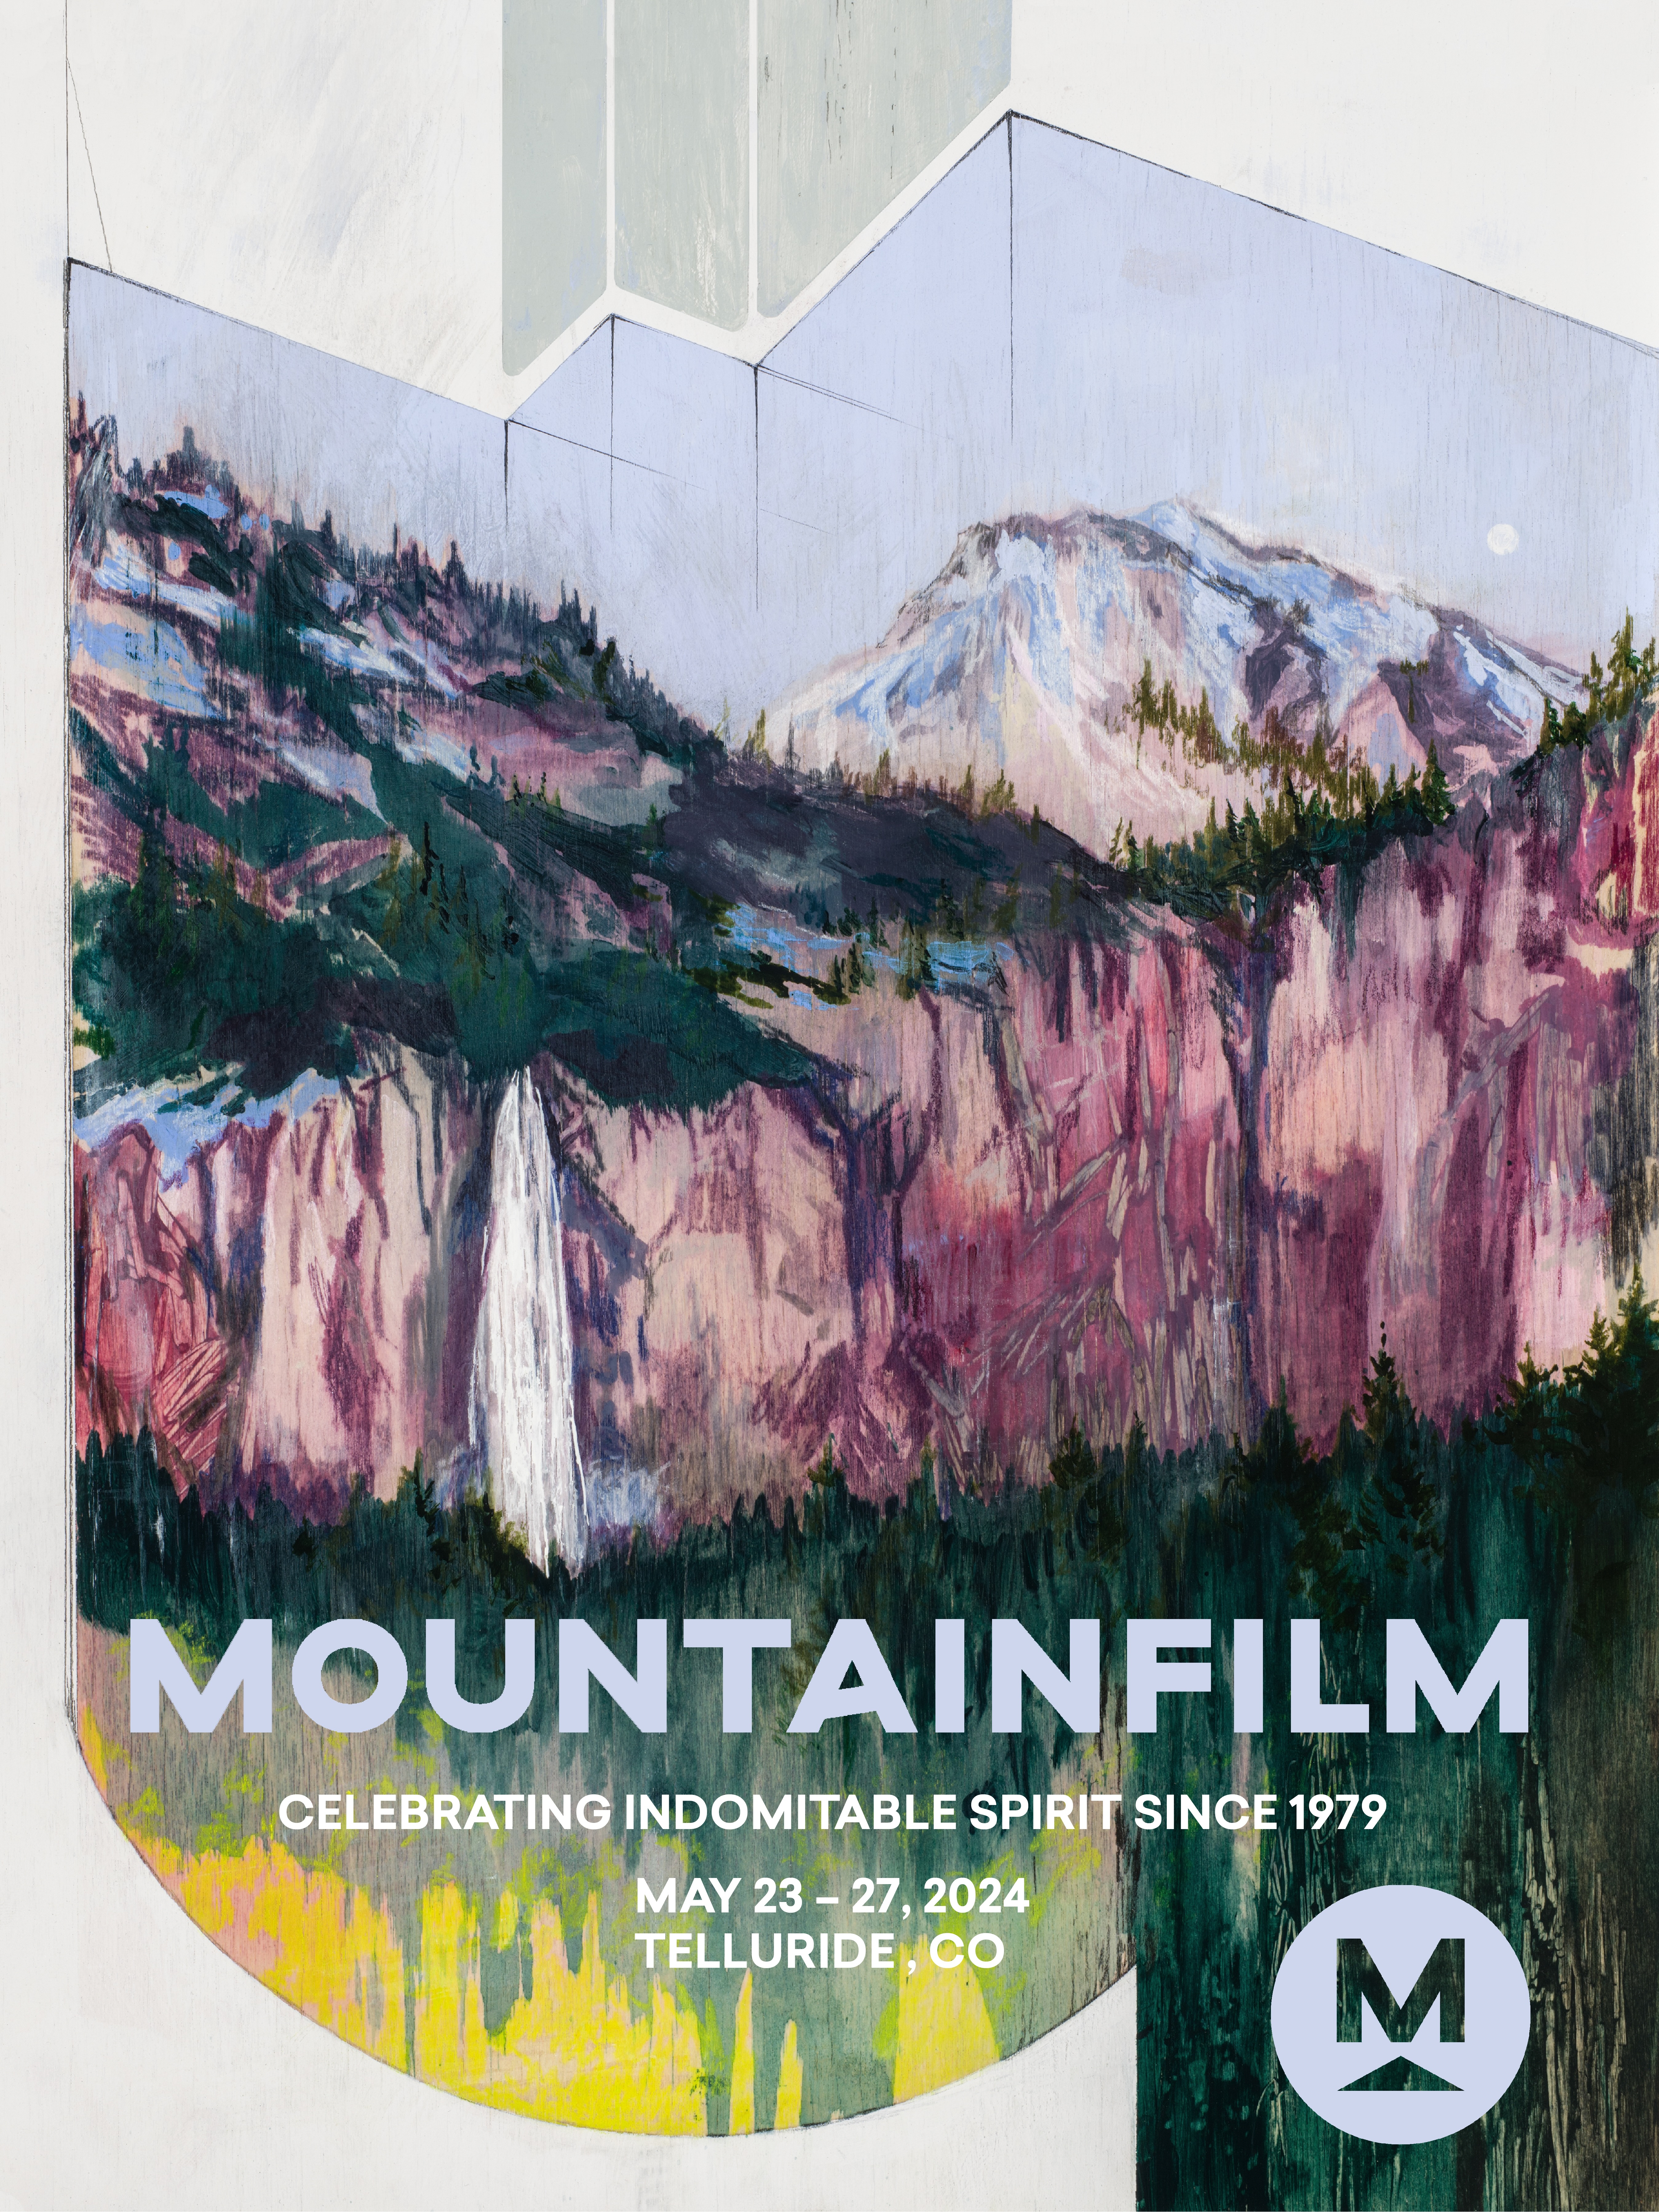 Mountainfilm Showcases Colorado Artists During Annual Festival